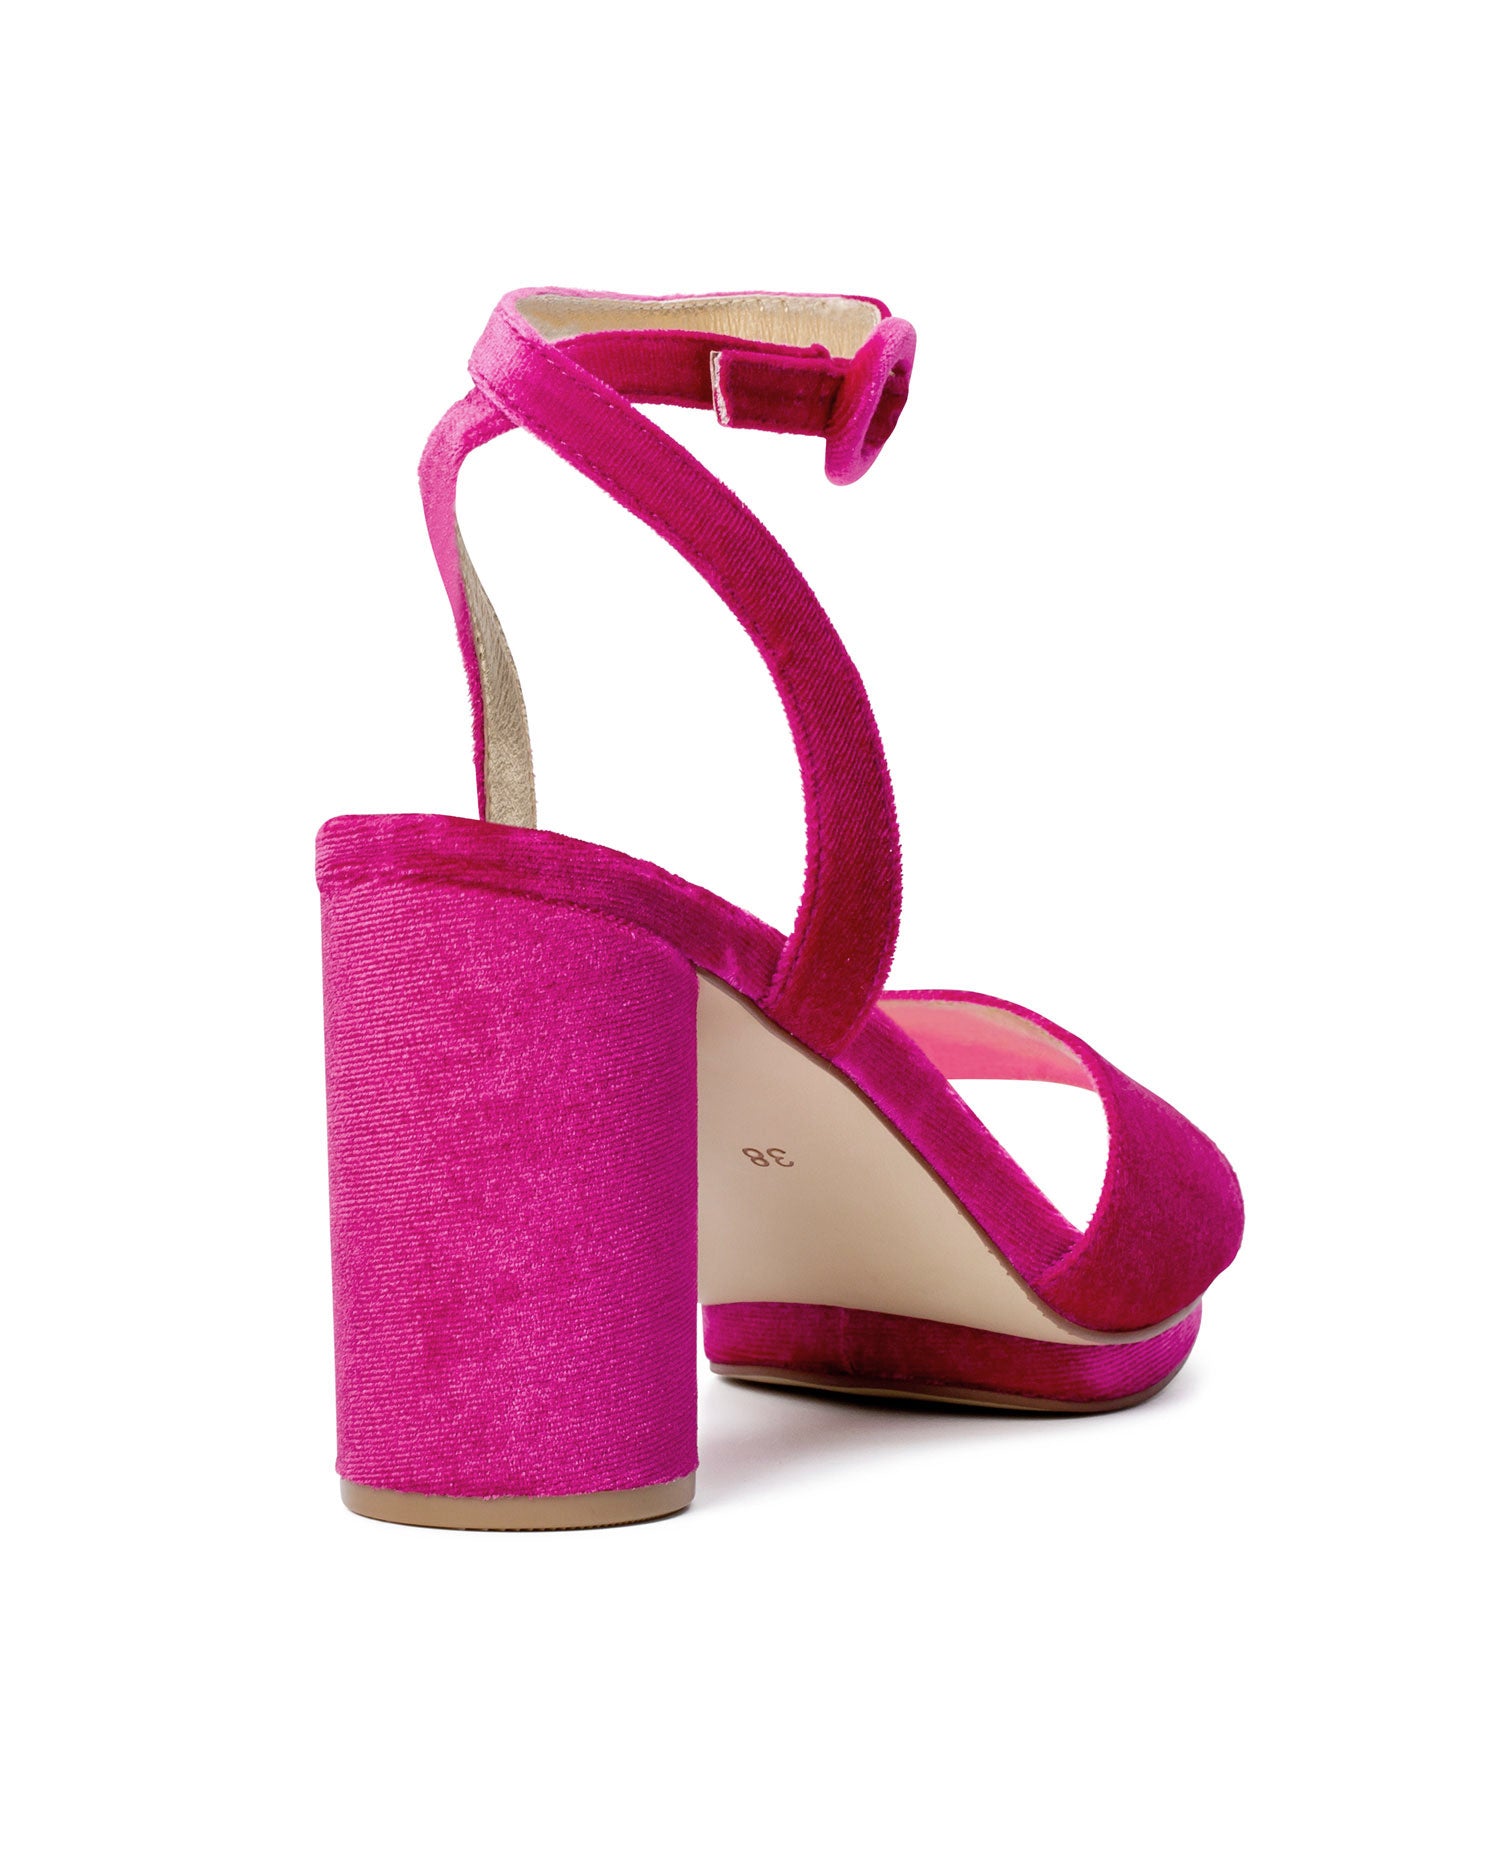 Hot pink platforms with peep toe for hens party, bachelorette parties ...